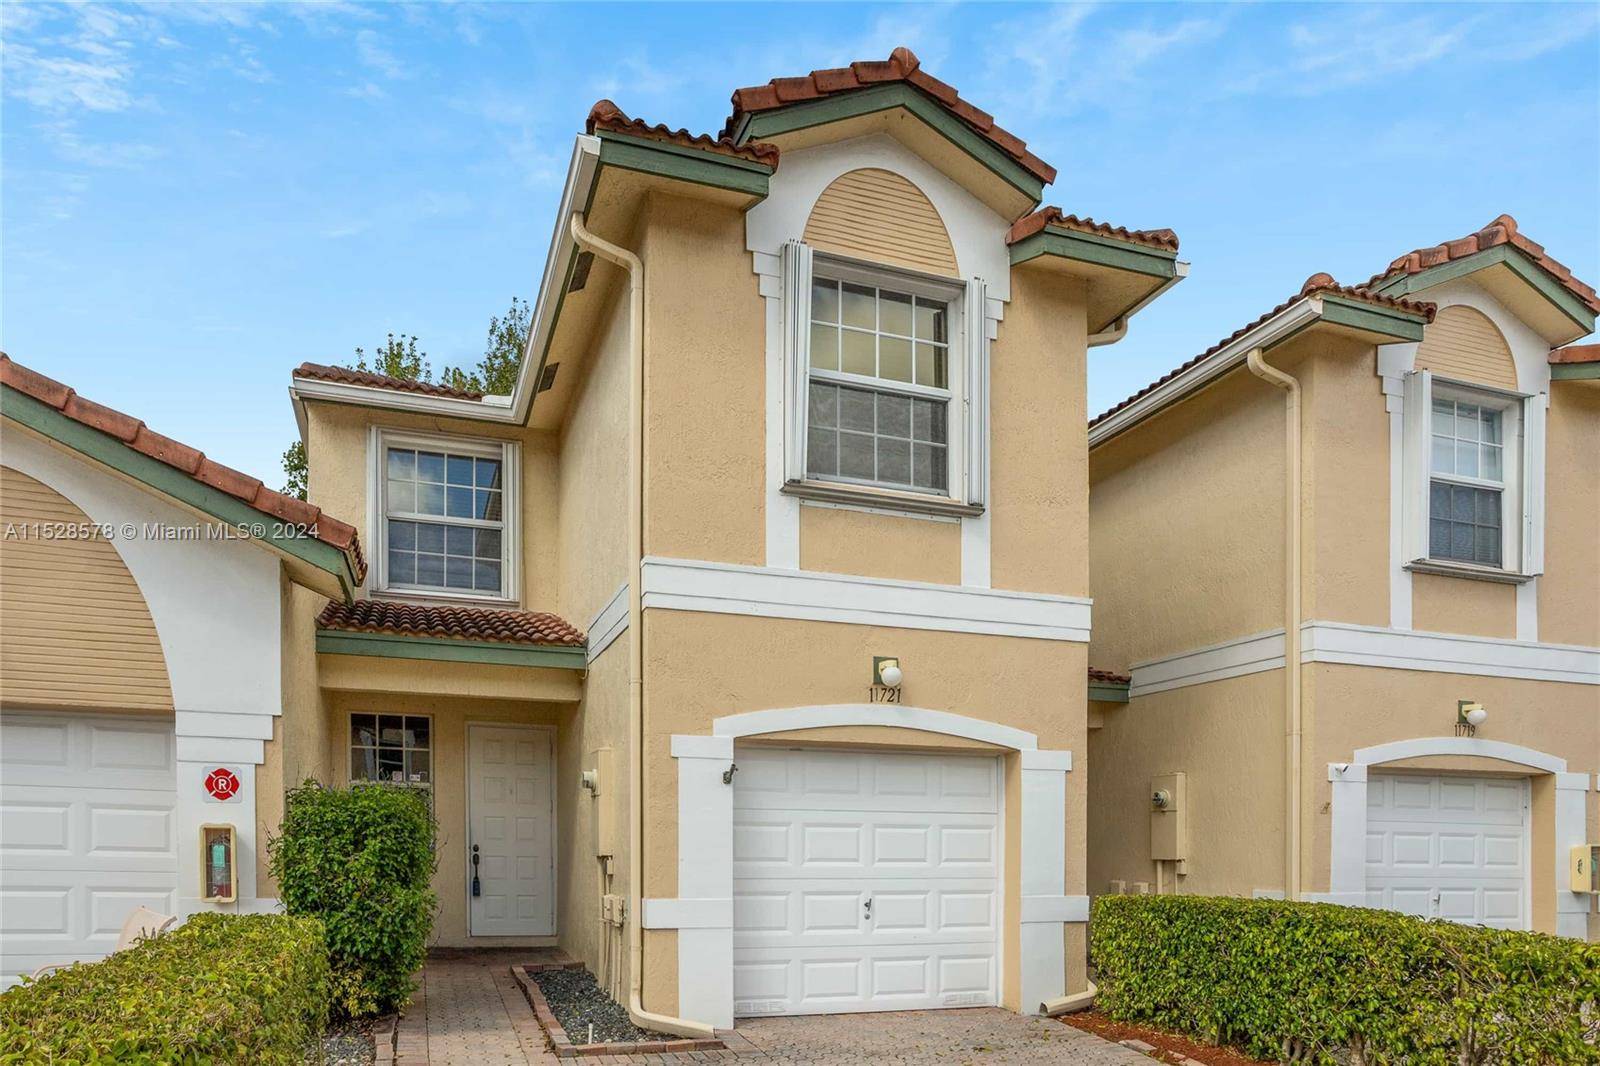 READY TO MOVE IN, BEAUTIFUL HOUSE 3 BED 2 1 2 BATH IN THE DESIRED GATED PELICAN POINT COMMUNITY WITHIN WYNDHAM LAKES, WITH CAMERAS AT ENTRY, HIGHLY DESIRABLE SCHOOL A ...